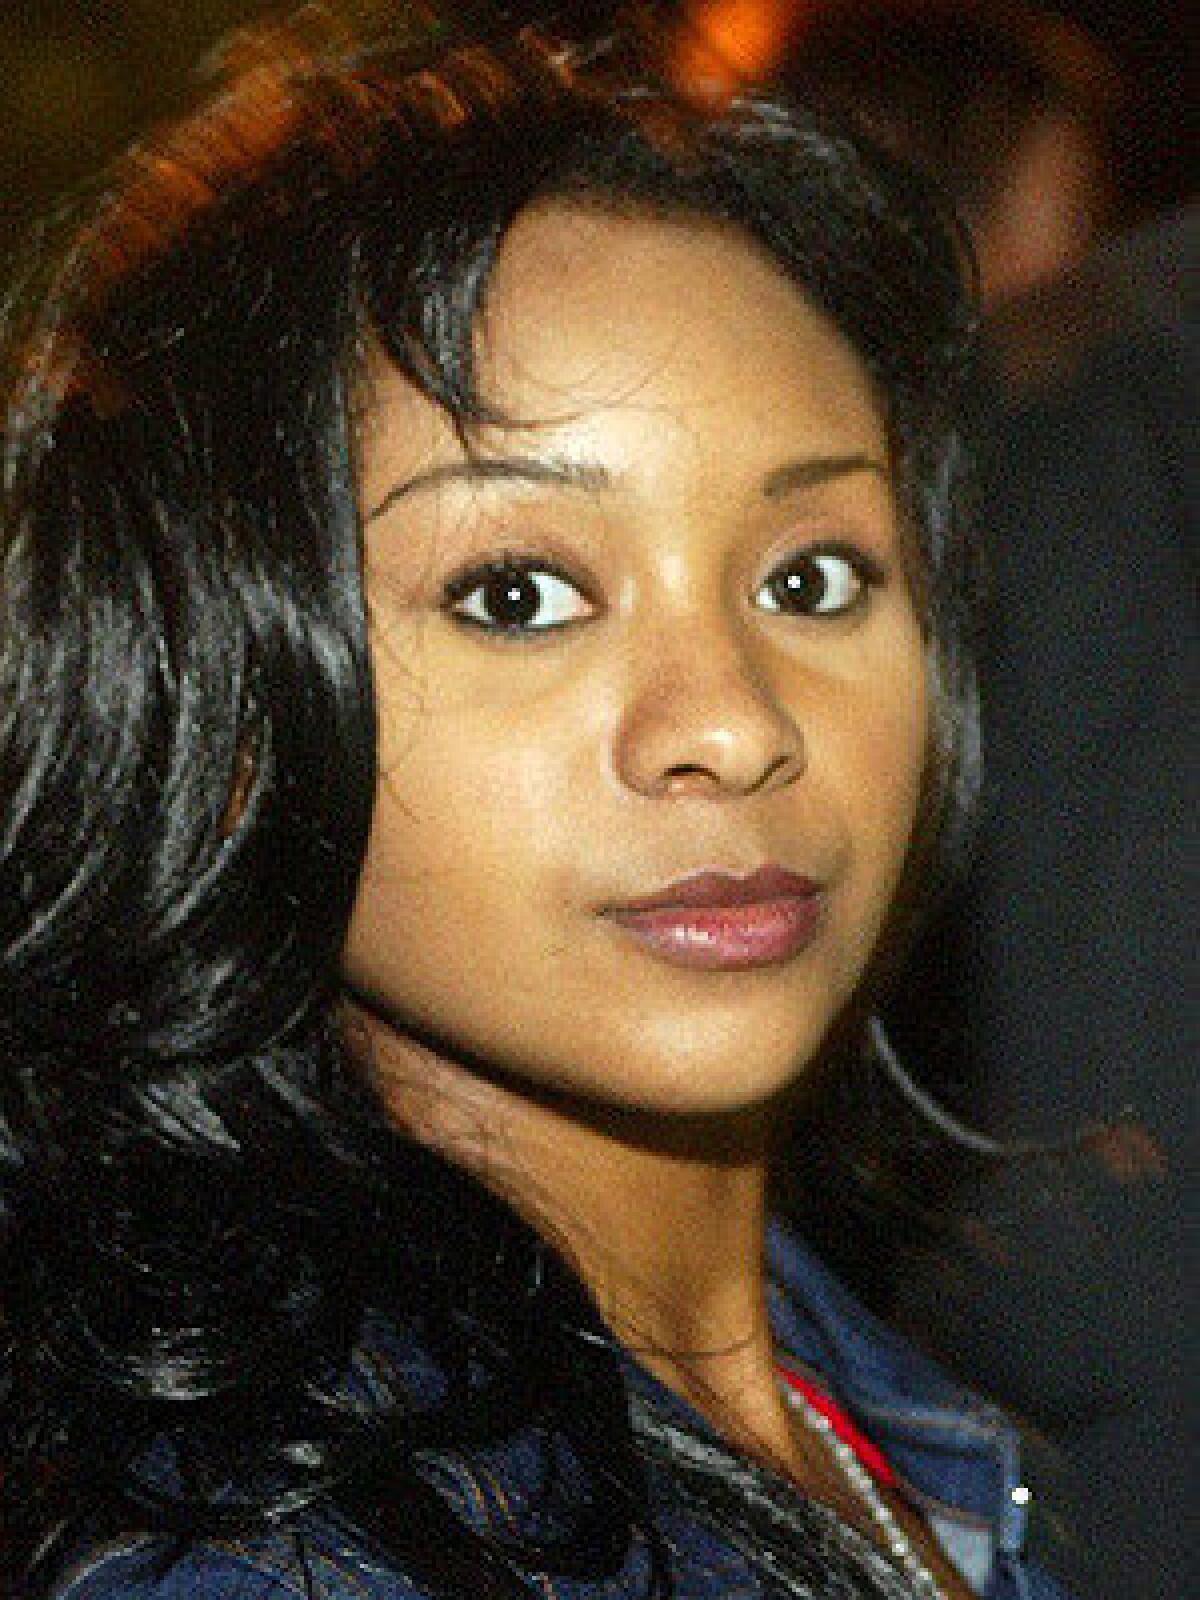 Natina Reed, actress and singer with the R&B group Blaque, died on Friday near Atlanta.